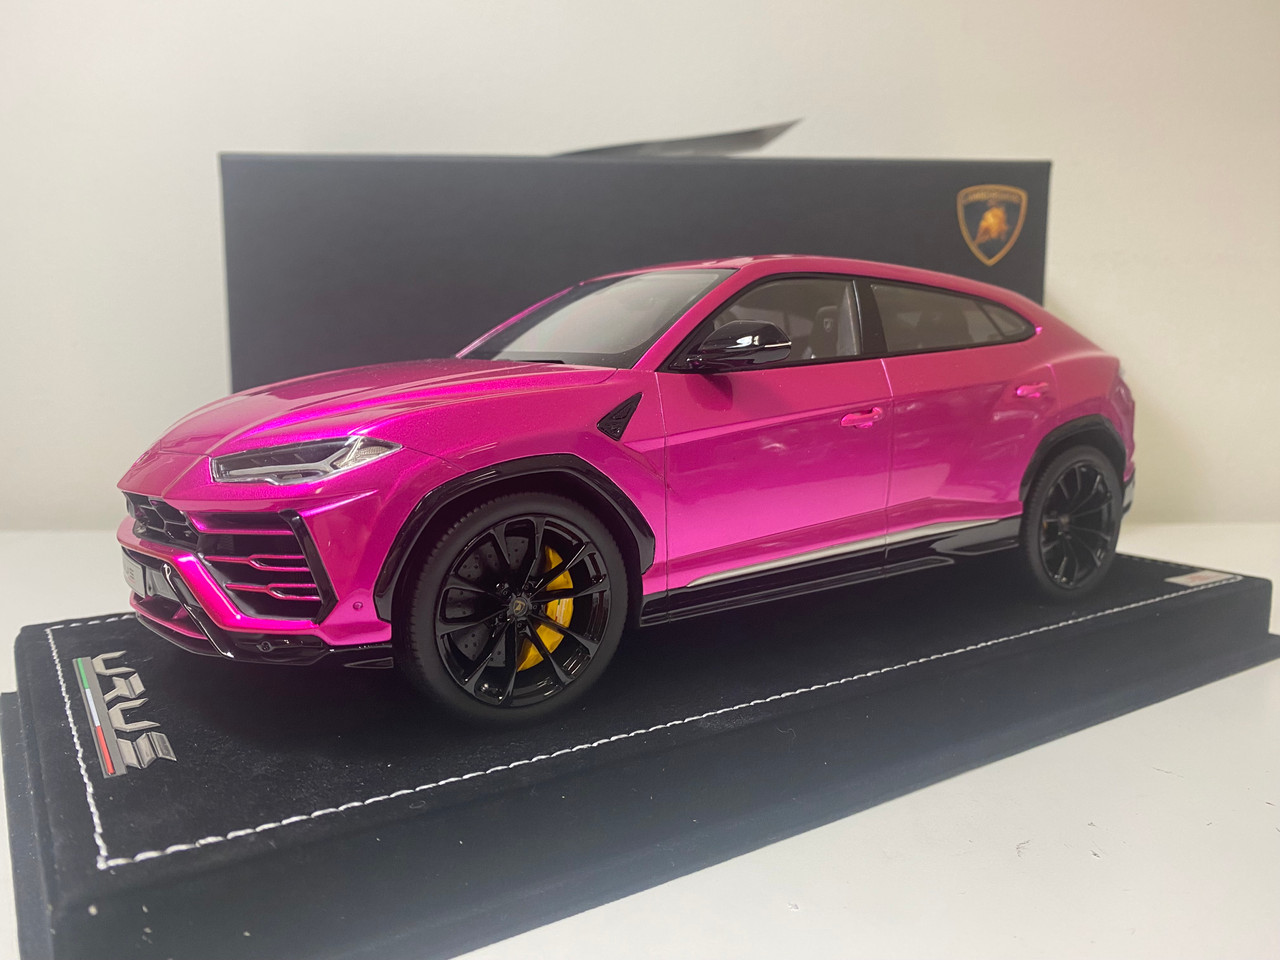 1/18 MR Collection Lamborghini Urus (Flash Gloss Pink) with Black Gloss Wheels & Yellow Calipers Car Model Limited 10 Pieces